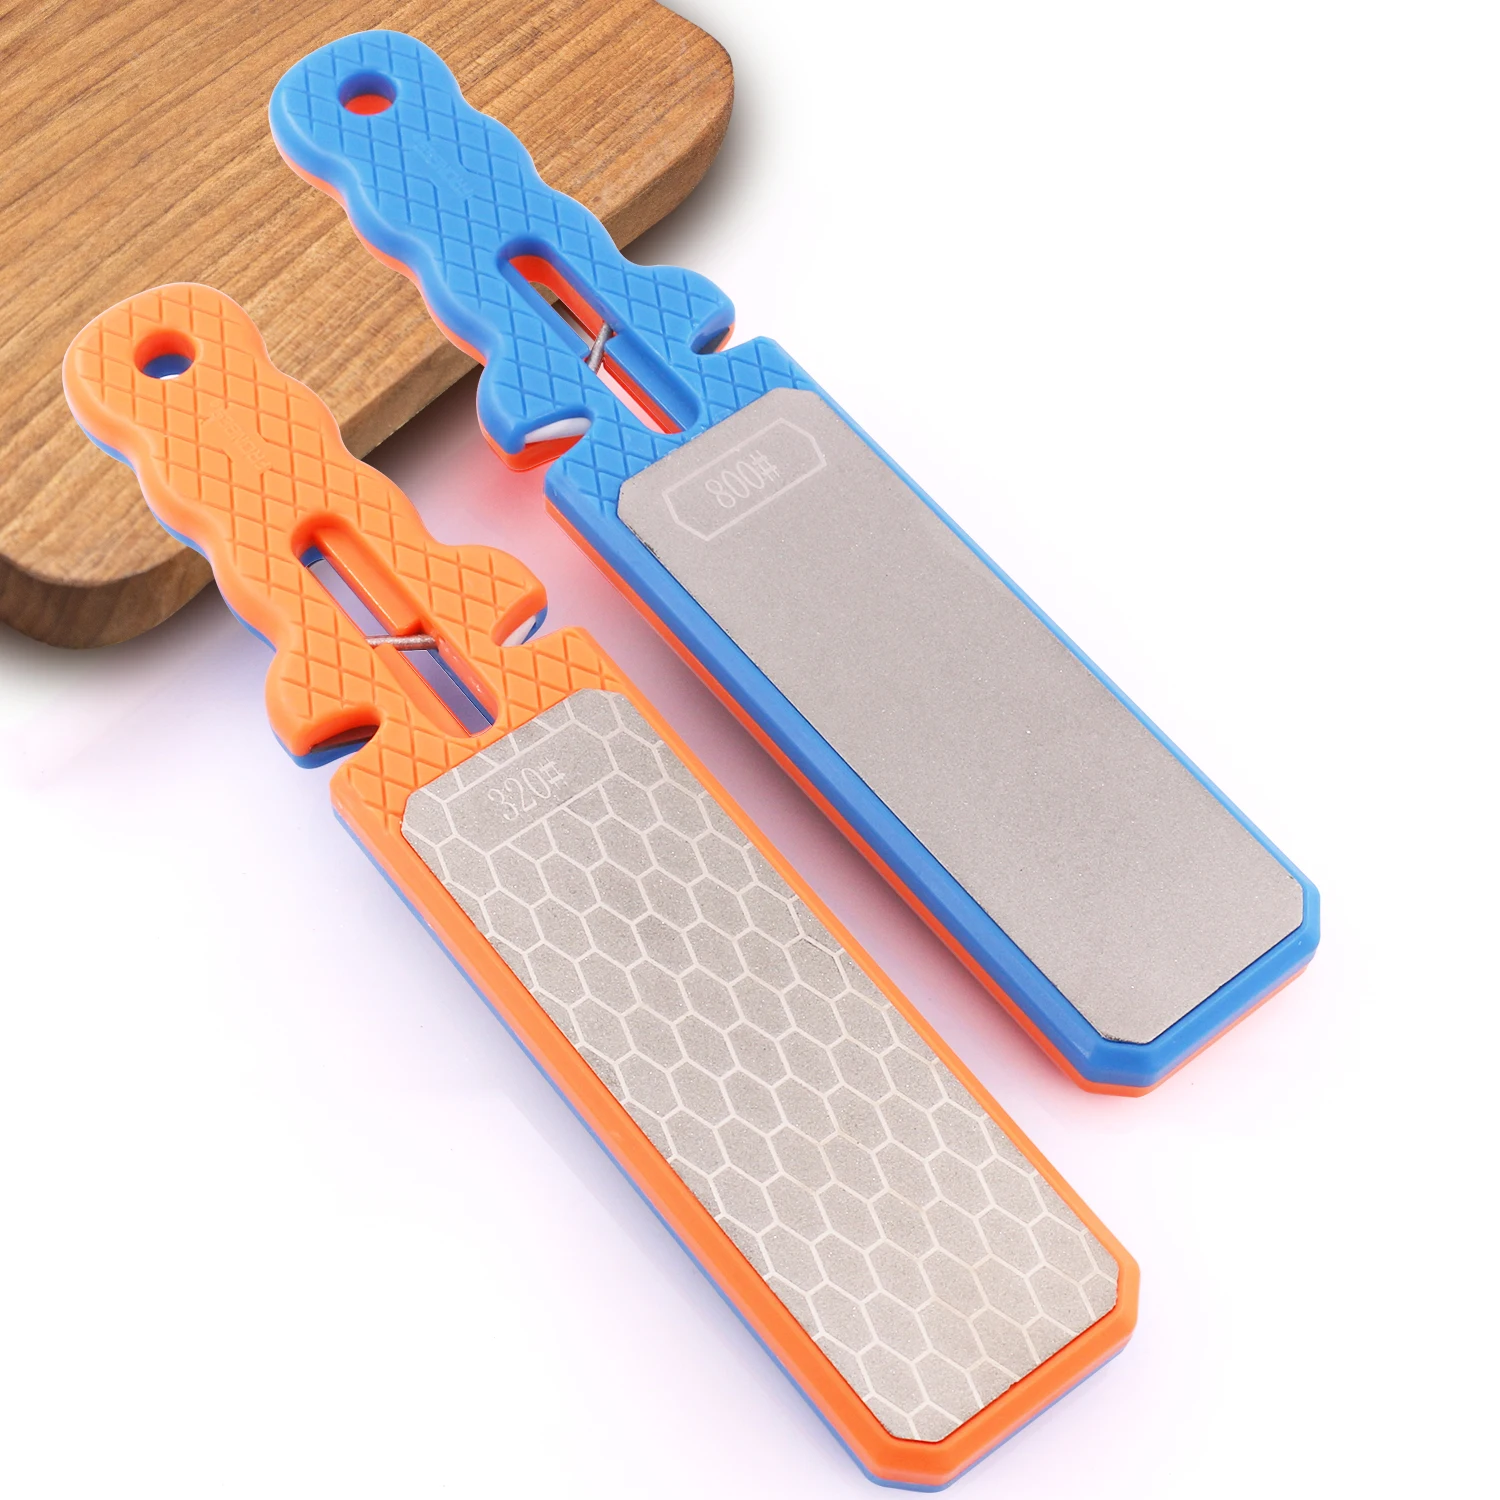 Z-LEAP Diamond Knife Sharpener Stones Grind Double-Side Kitchen Tools Diamond Sharpening Plate Knife Scissors Sharpener Ceramic kitchen bathroom faucet water filter 7 layer visual ceramic cartridge 0 1μm weakly alkaline remove rust bacteria dechlorination